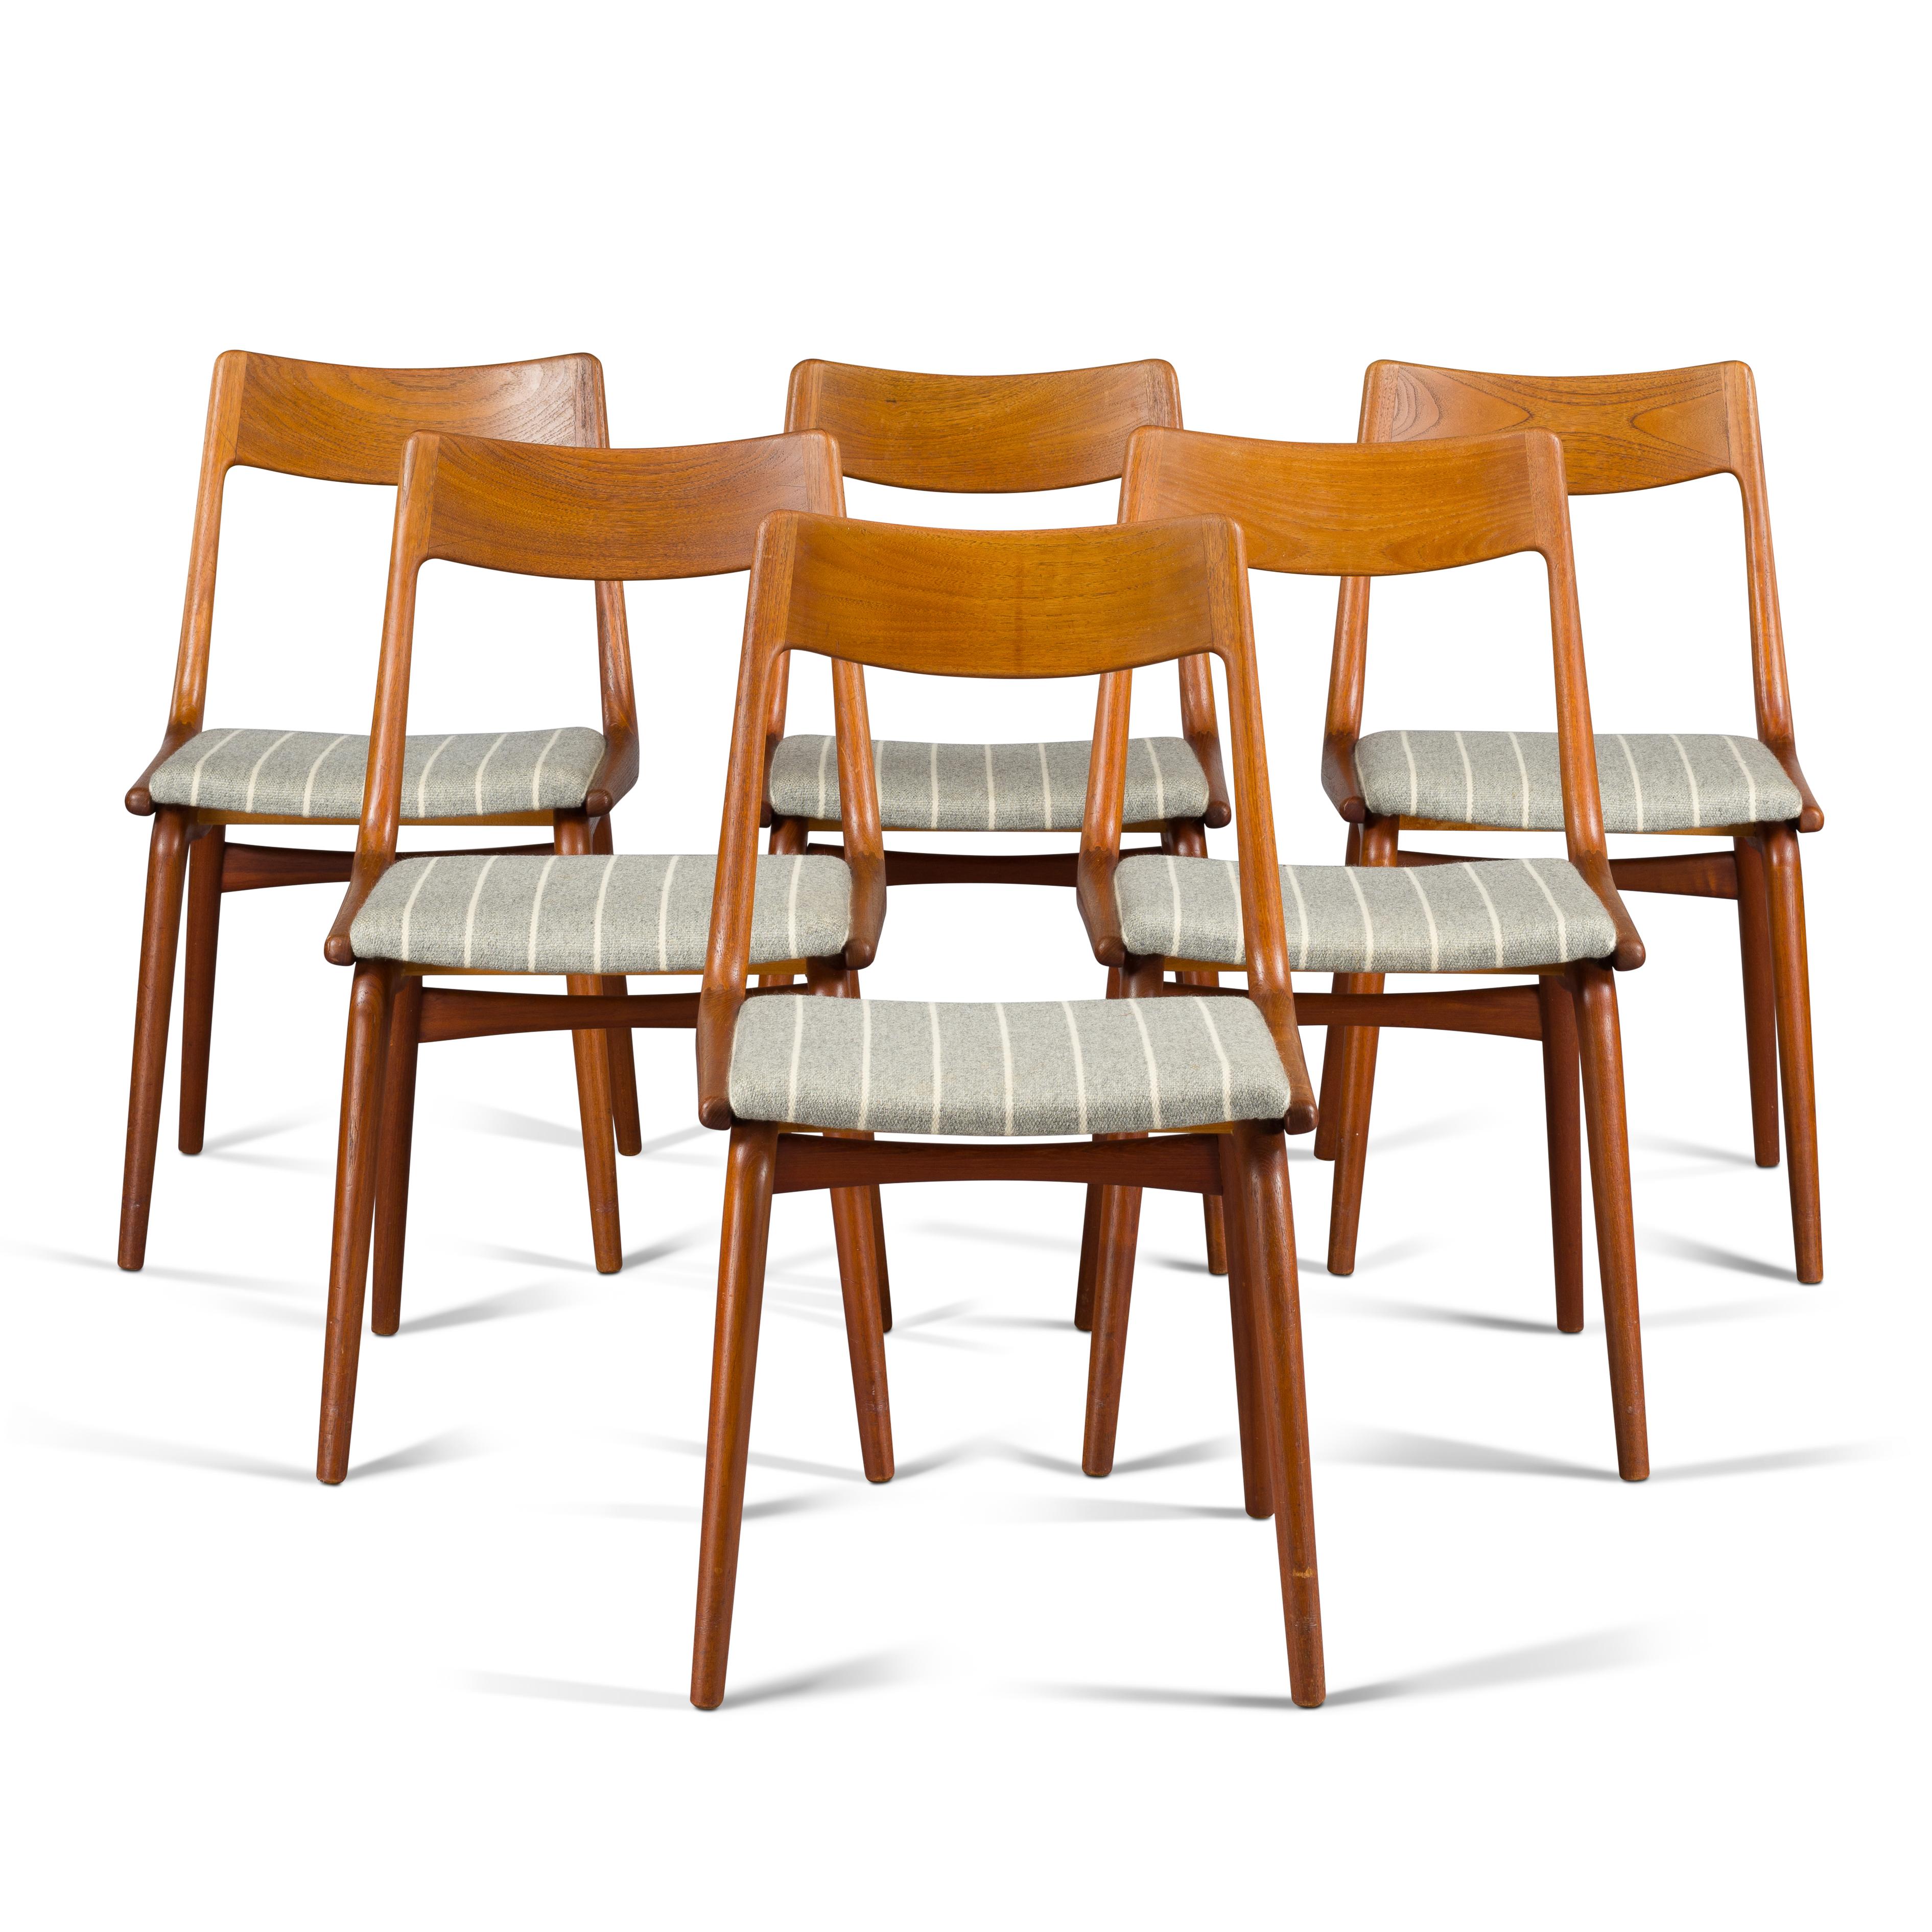 This dining chair is designed by Erik Christiansen and made from solid teak wood. The irresistible appeal of the chair is determined by the Boomerang shape of the back. The vintage wool upholstery is probably original and in good condition. But if